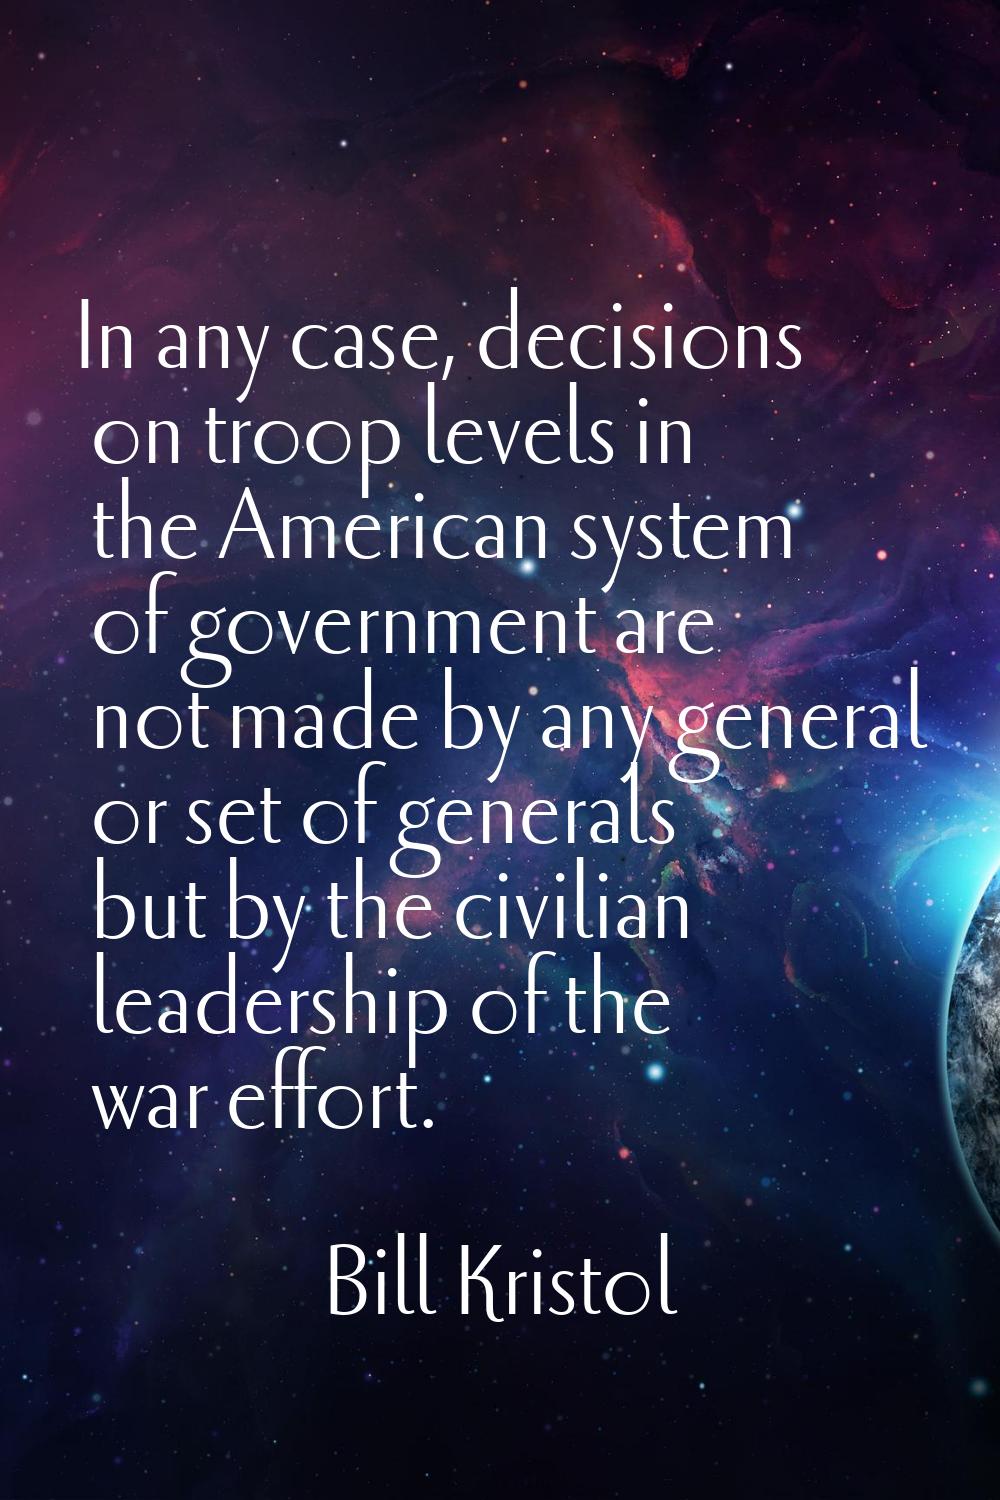 In any case, decisions on troop levels in the American system of government are not made by any gen